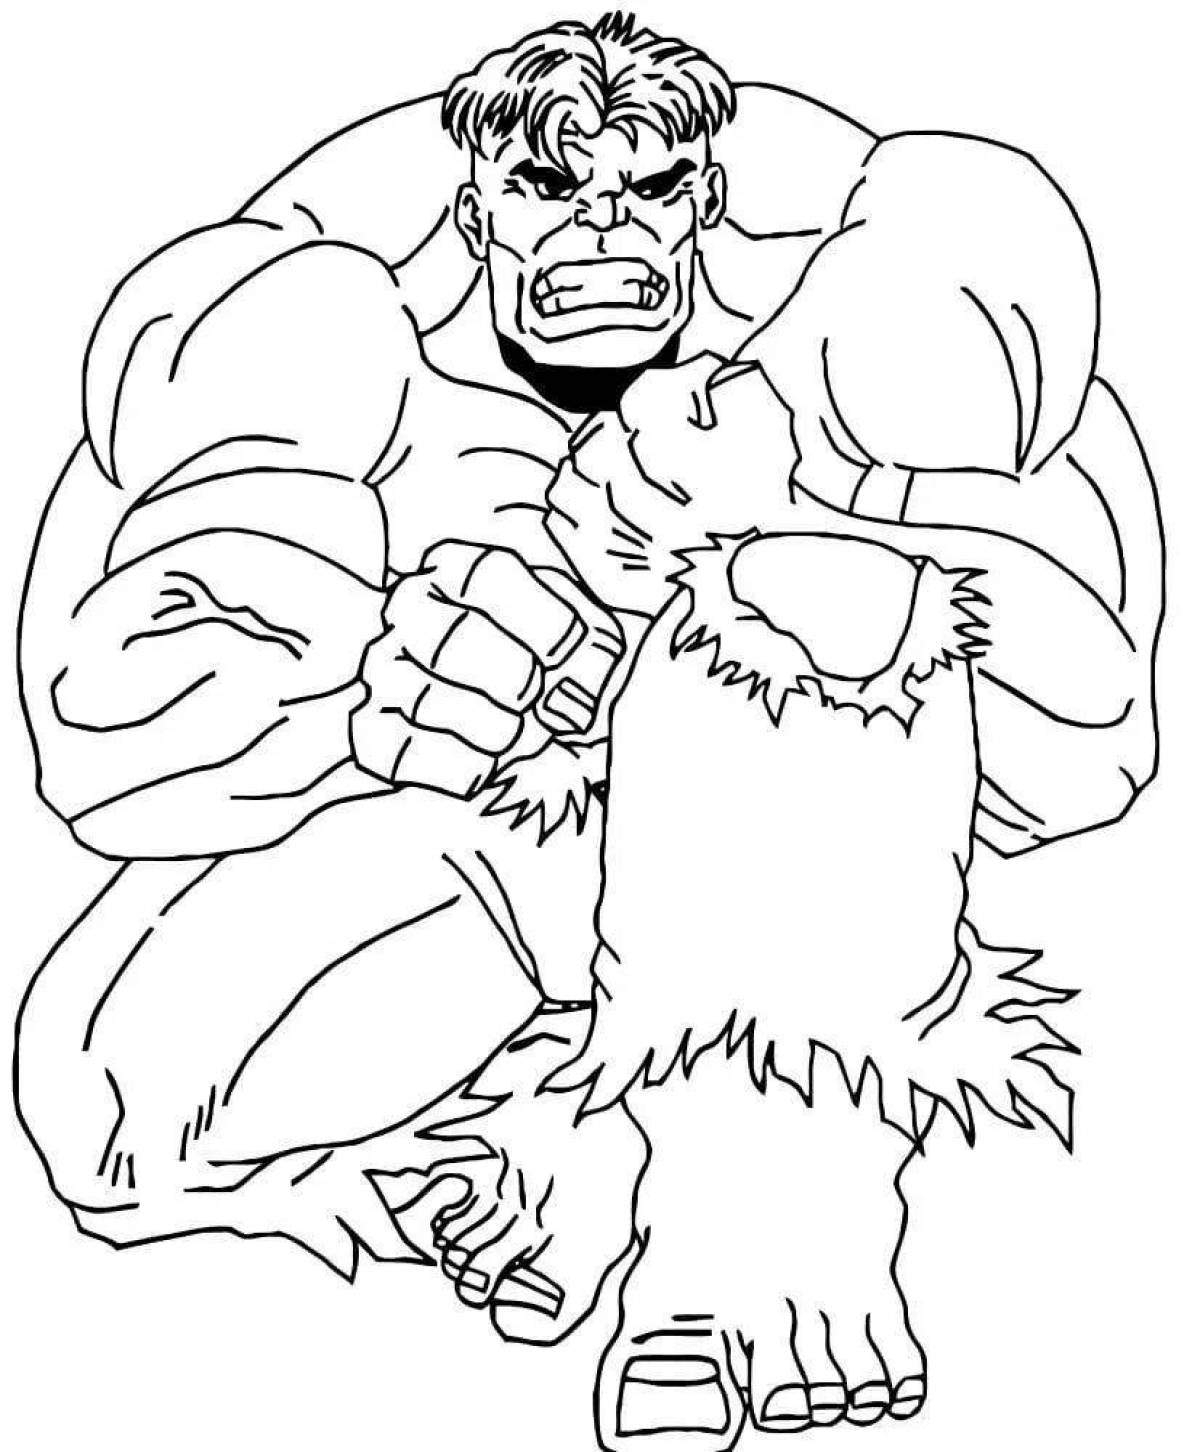 Fun superhero coloring pages for 5-6 year olds